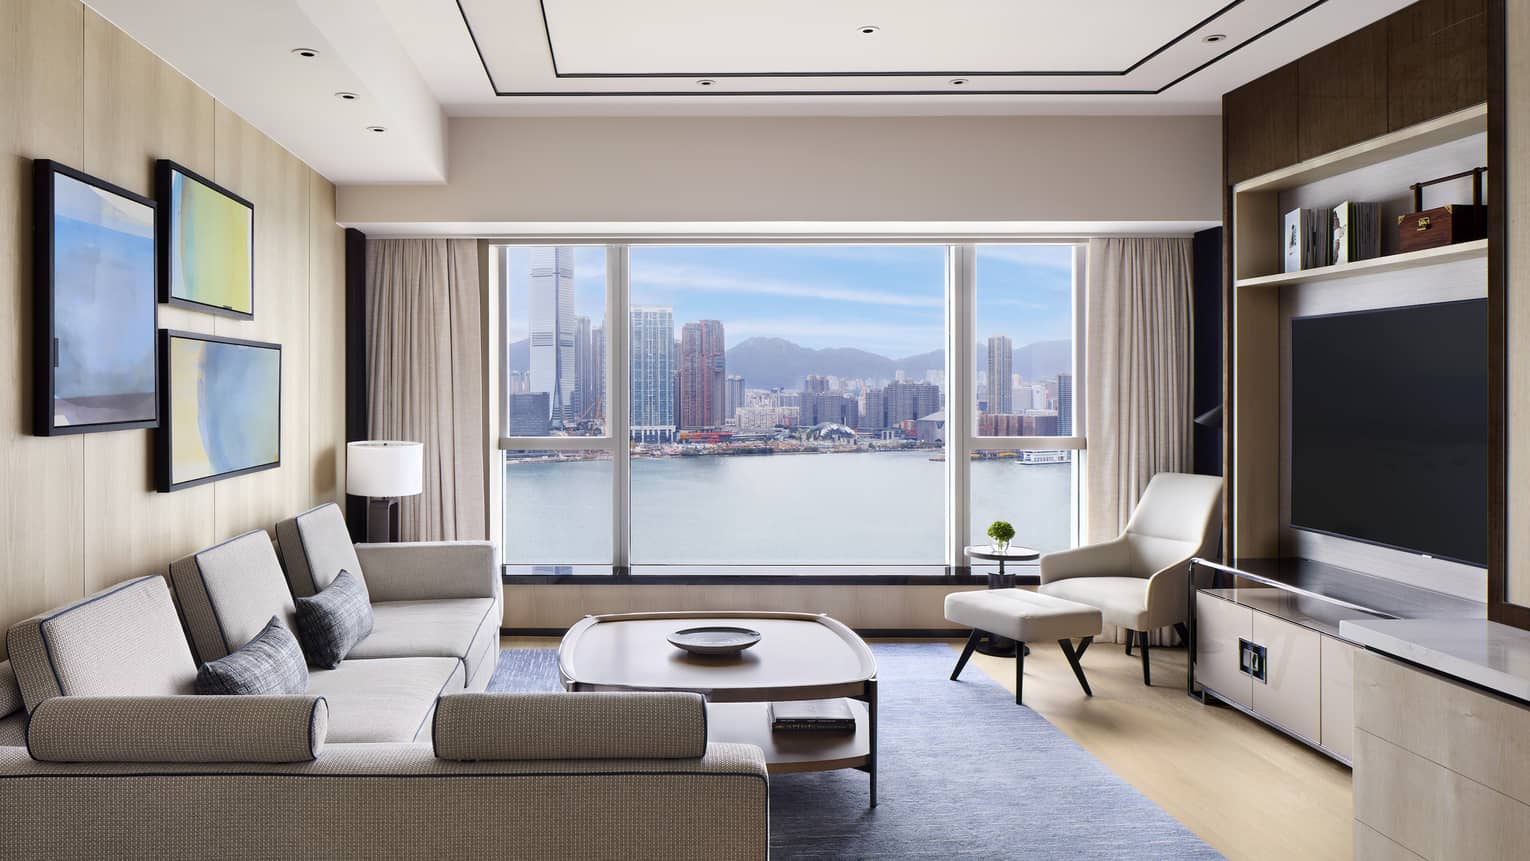 Contemporary living room with large window overlooking city harbour